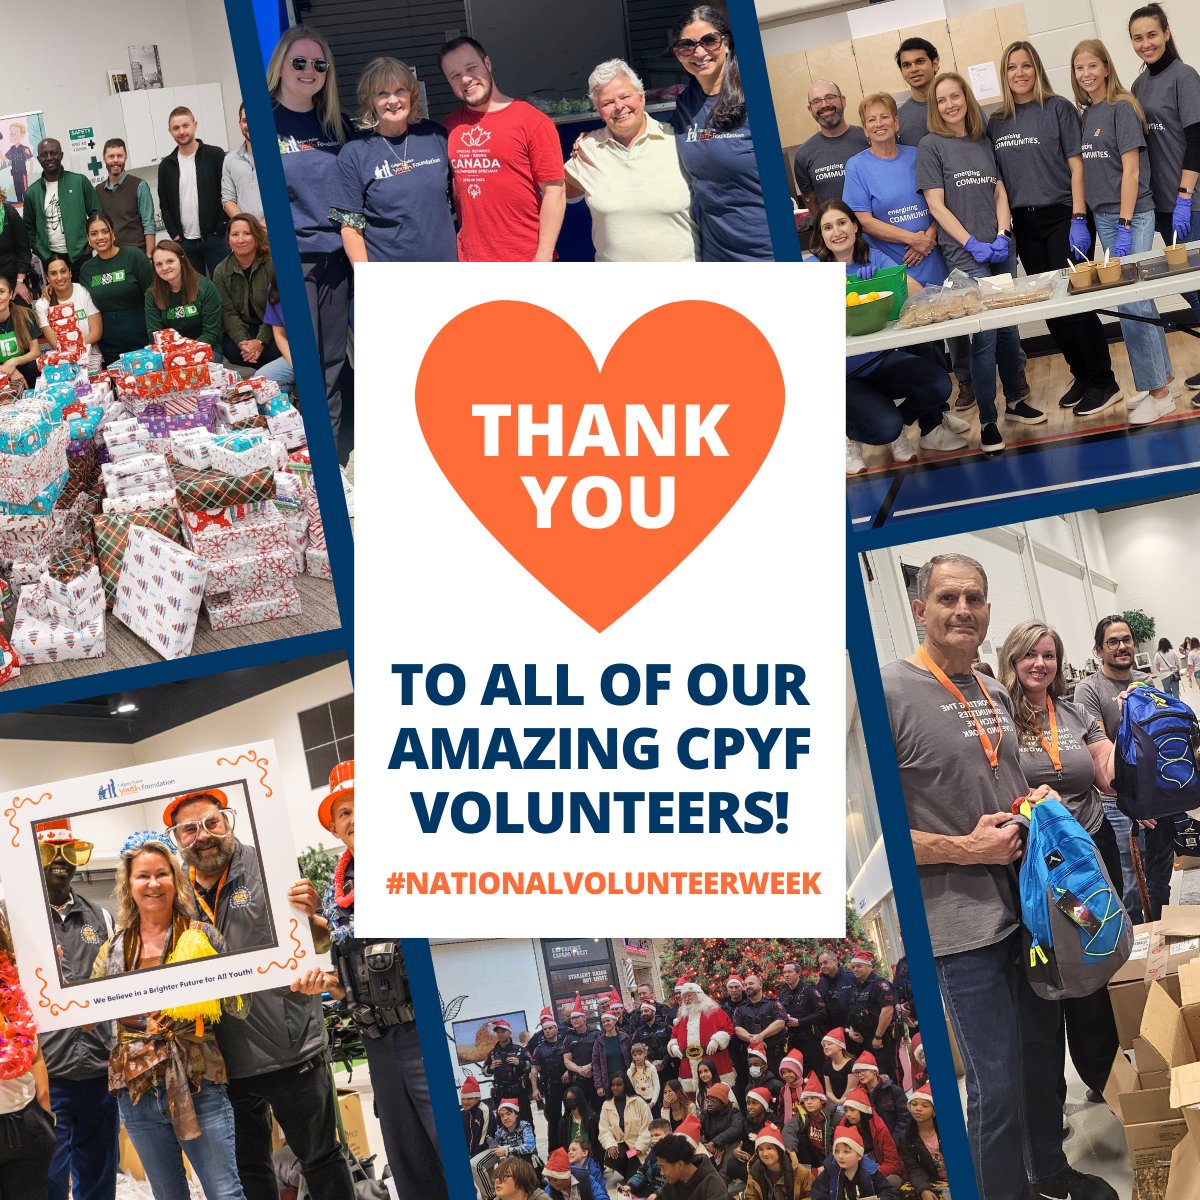 As we wrap up our #NationalVolunteerWeek celebration, we wanted to once again thank ALL of our CPYF volunteers. Your passion, dedication, and commitment to children and youth in our community is incredible. Thank you for the generous gift of your time, talents, and treasure. 👏💗